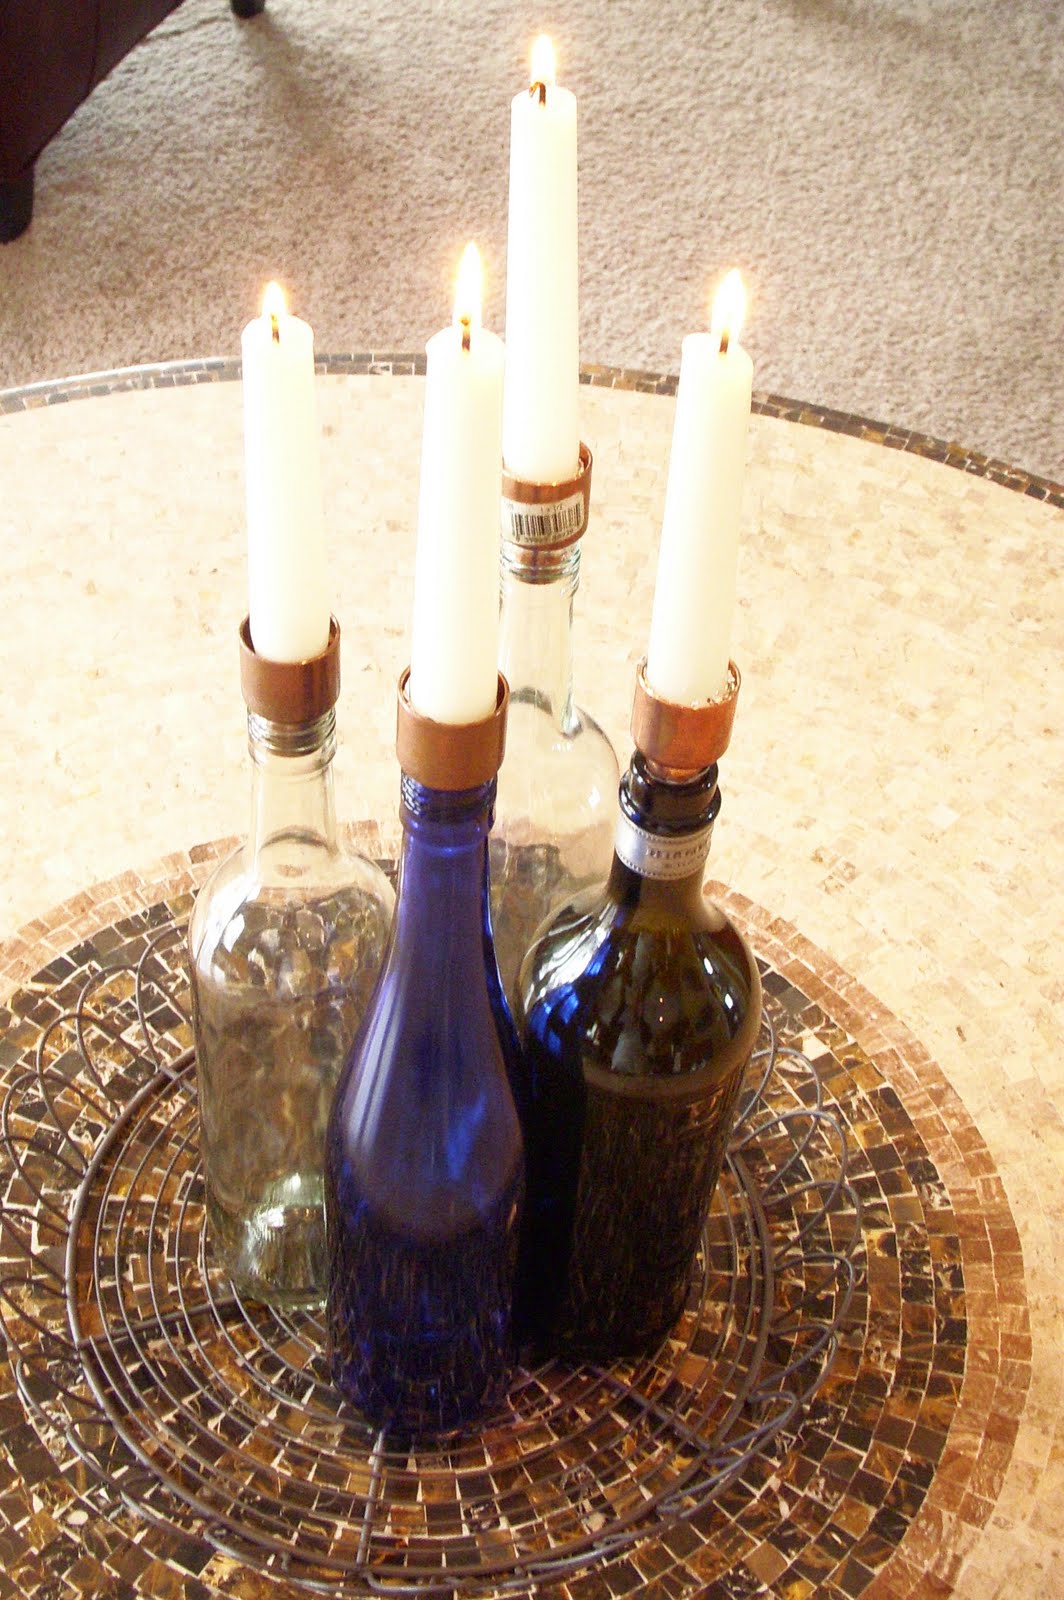 Unique Candle In Wine Bottle for Simple Design